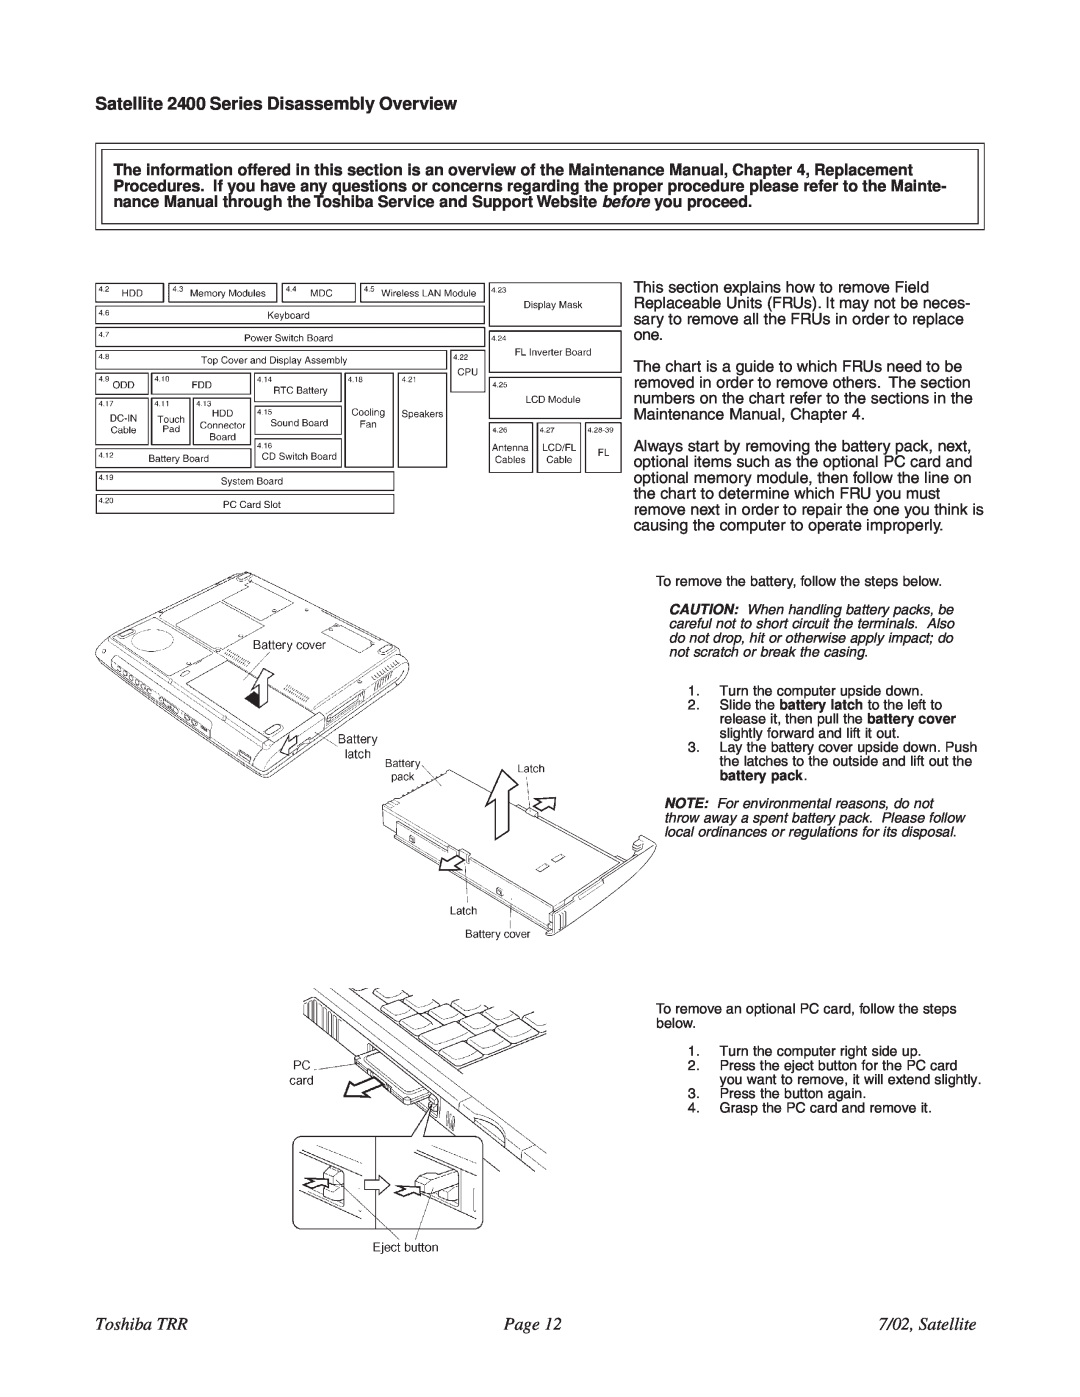 Toshiba 2405-S201 specifications Satellite 2400 Series Disassembly Overview, Toshiba TRR, Page, 7/02, Satellite 